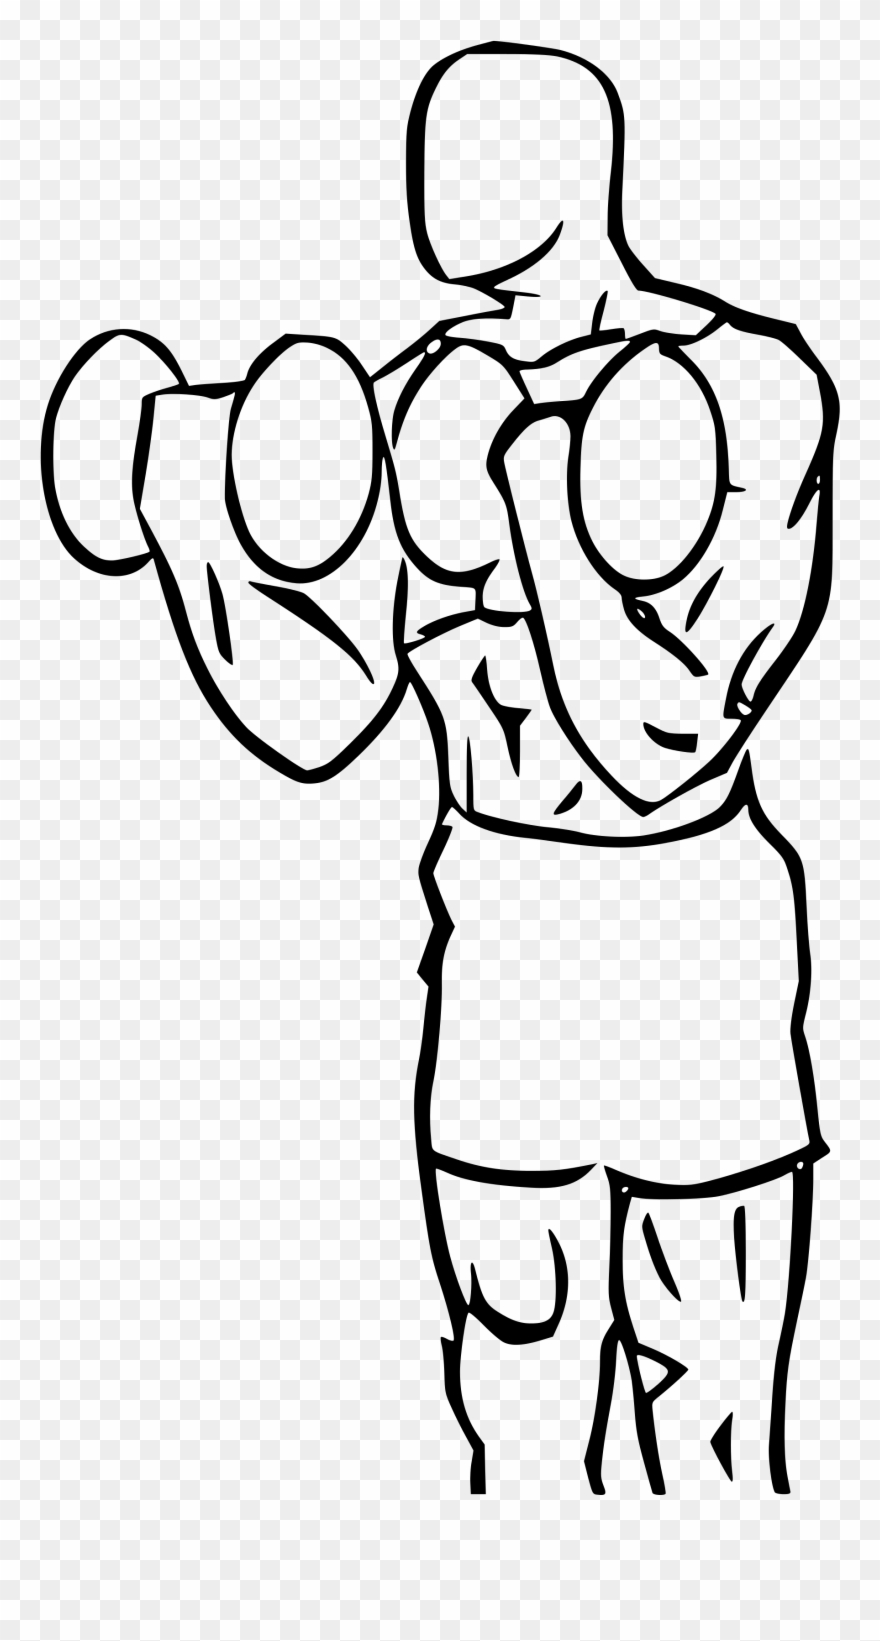 Bicep clipart animated, Bicep animated Transparent FREE for download on